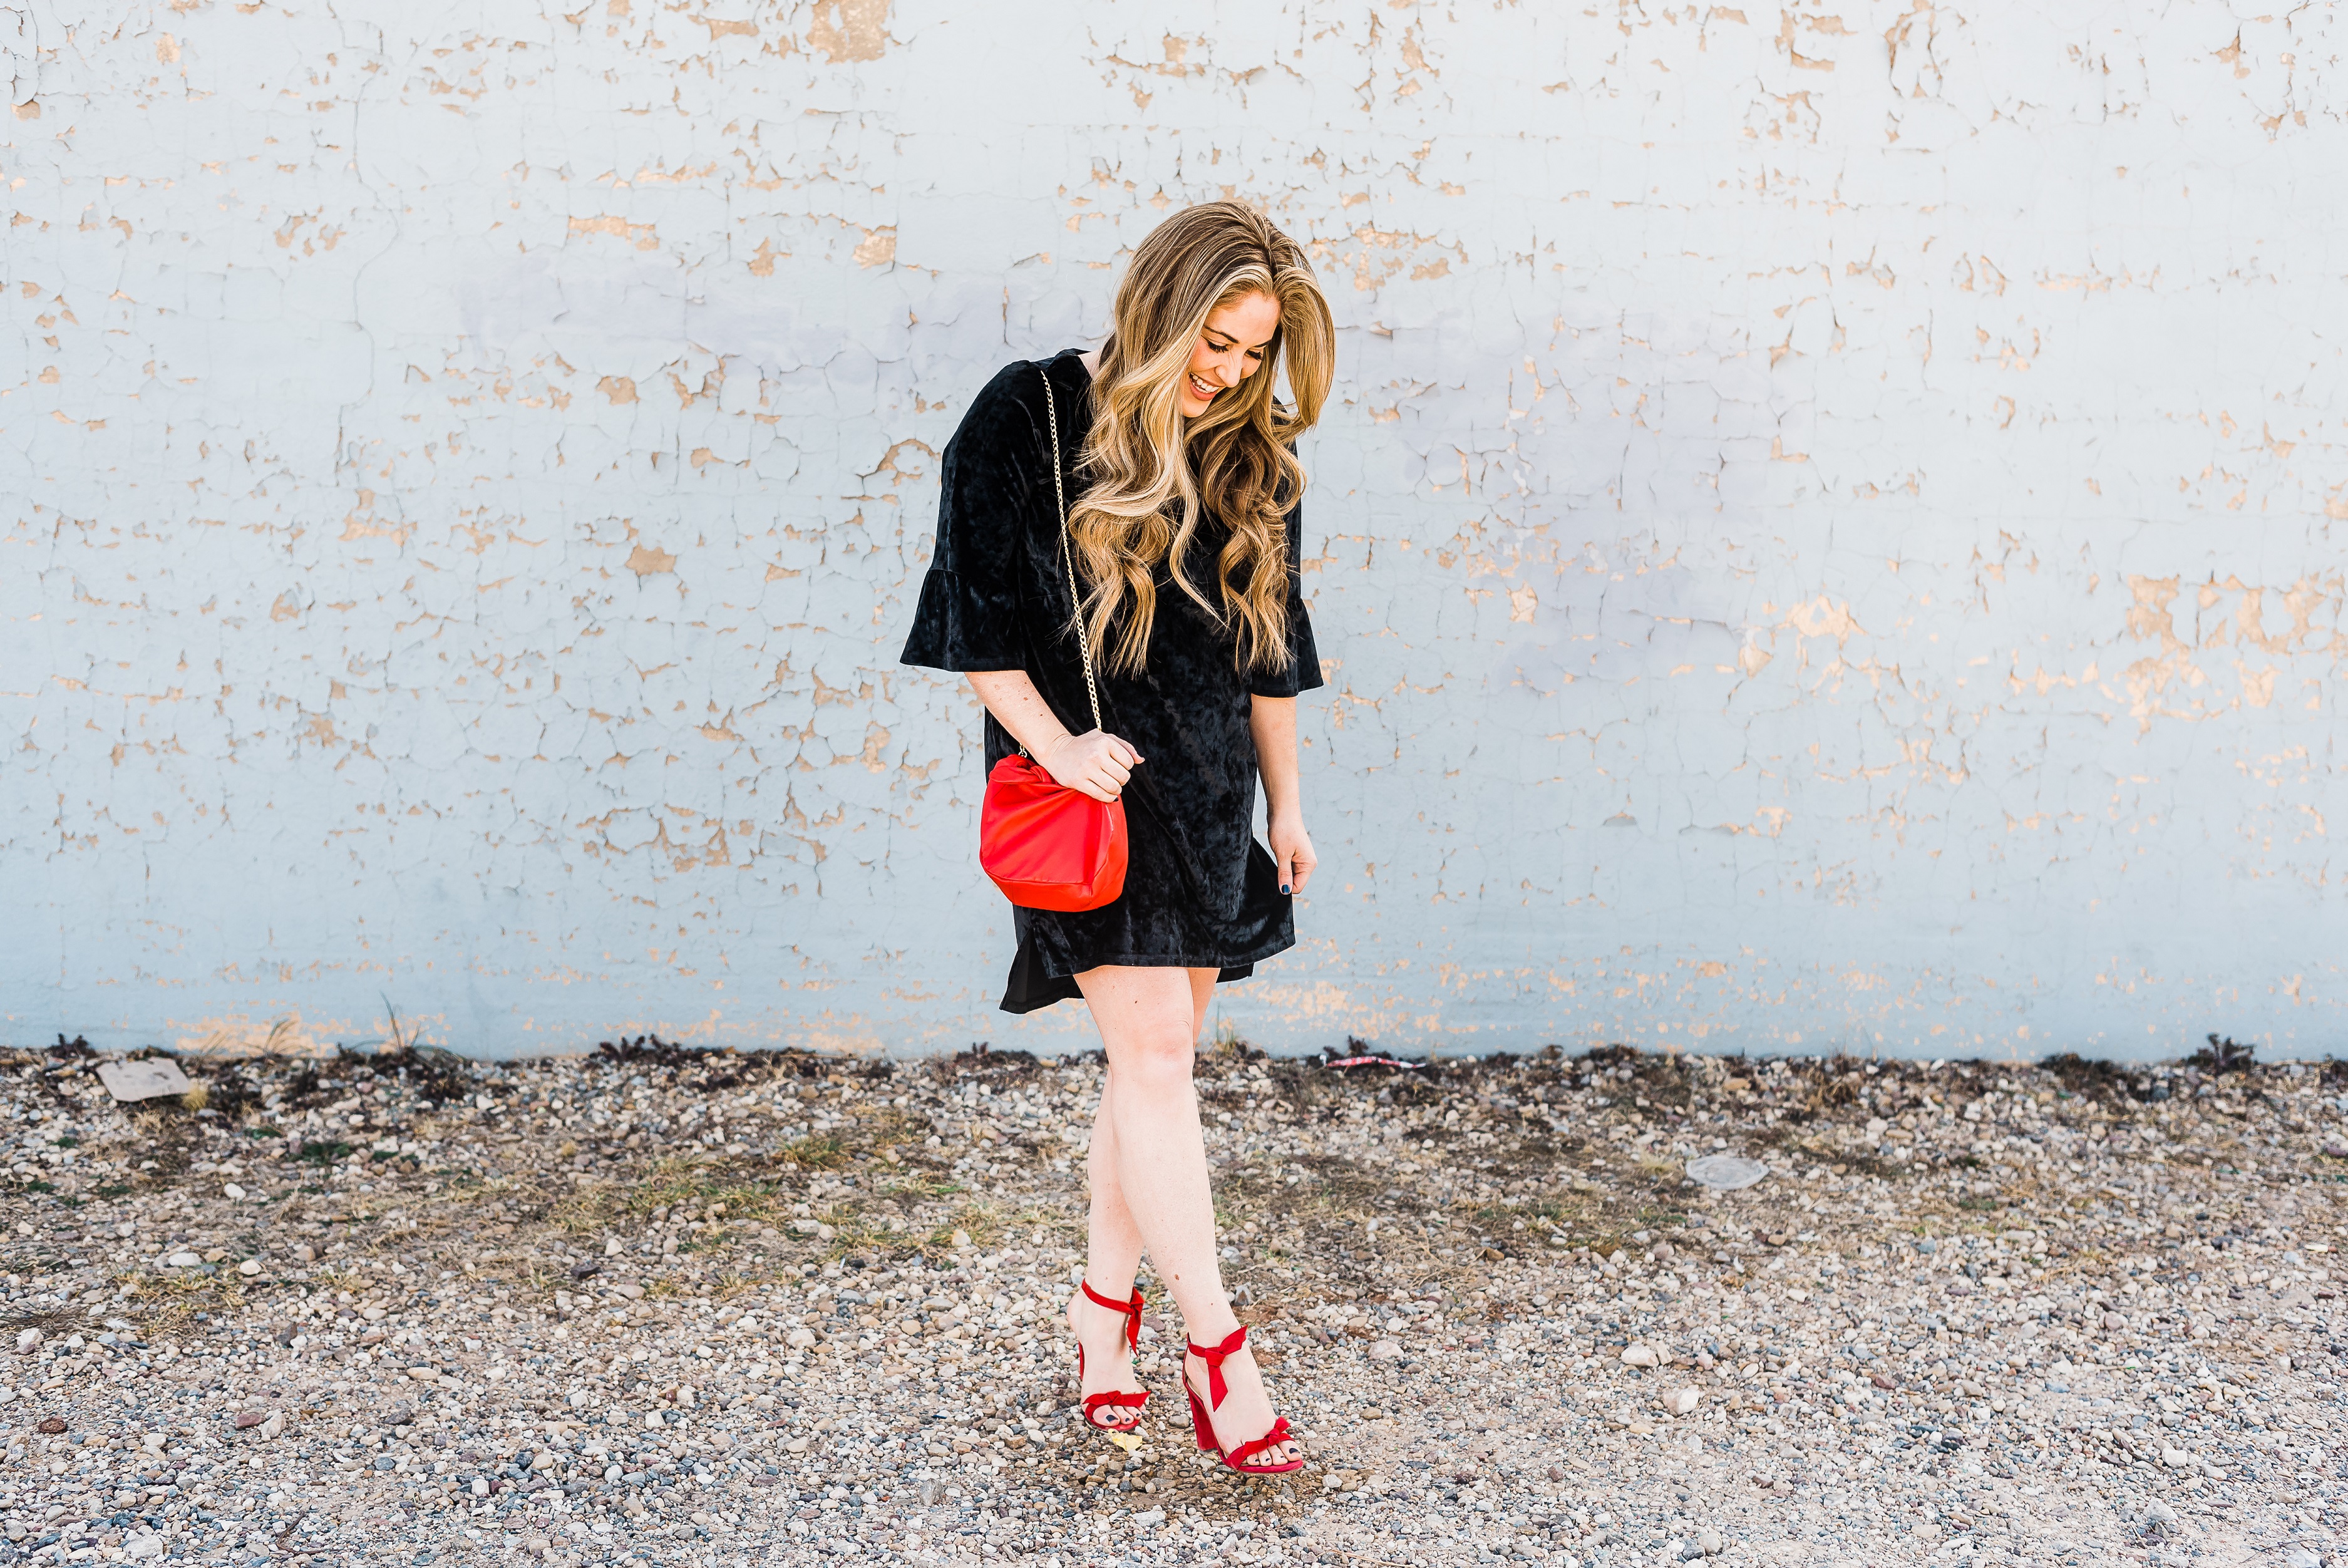 How to Add Red Accessories for the Perfect Valentine's Day Look by East Memphis fashion blogger Walking in Memphis in High Heels